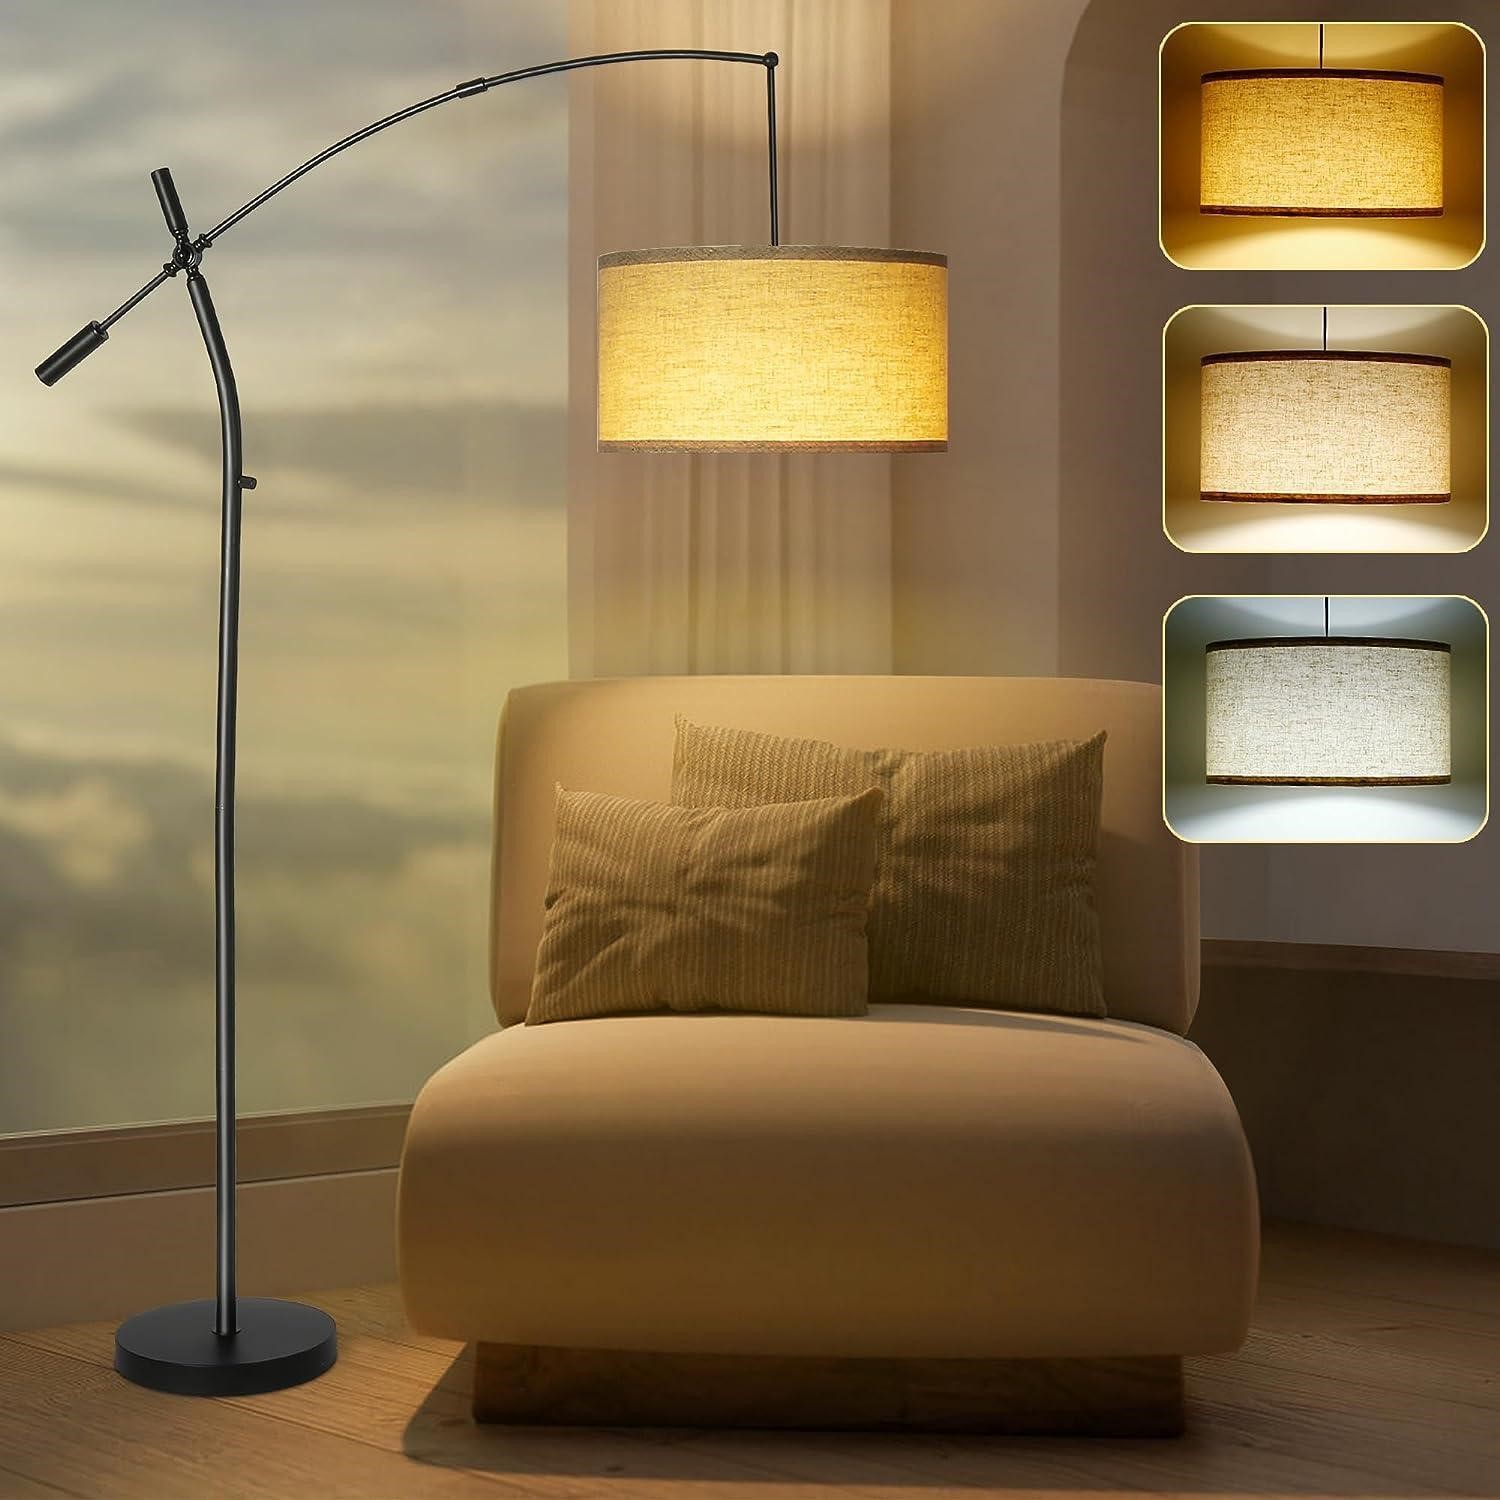 AS IS-Arc Floor Lamp for Living Room